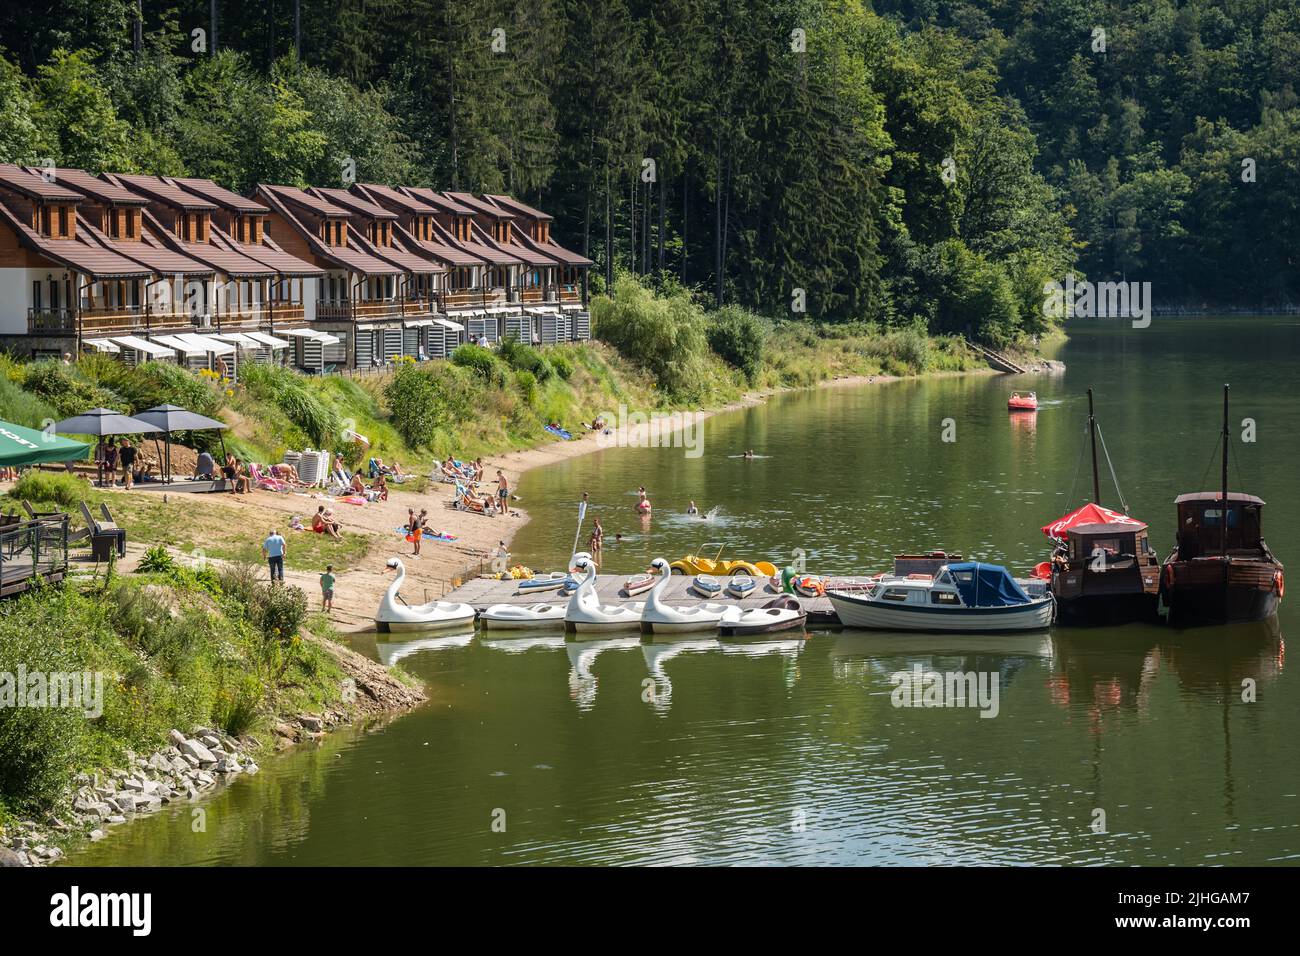 Zagorze Slaskie, Poland - August 2020 : Water cycle boats and small yachts in front of Holiday let homes and bungalows on the shore of Zagorze Slaskie Stock Photo